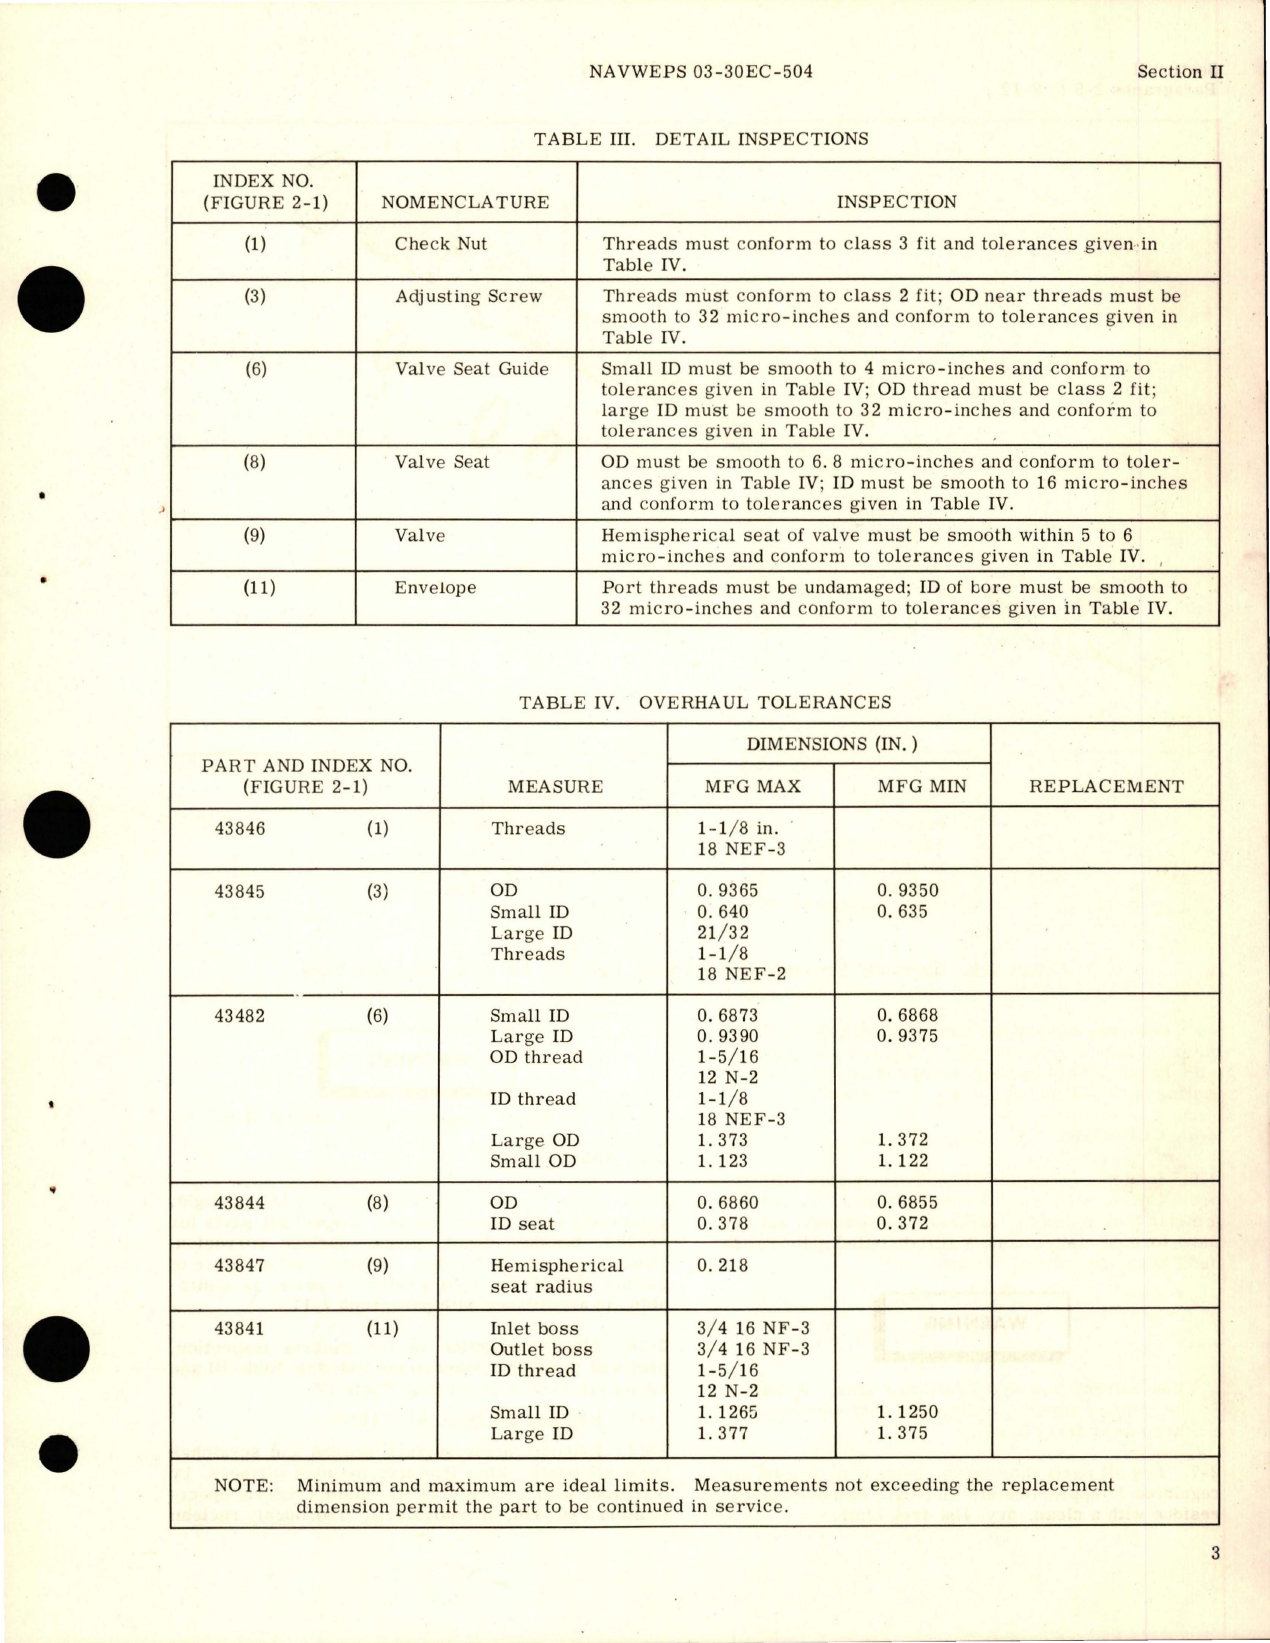 Sample page 7 from AirCorps Library document: Overhaul Instructions for Hydraulic Pressure Relief Valves - Parts AB-8-01, AB-8-02, AB-8-02A, AB-8-03, and AB-68-04 